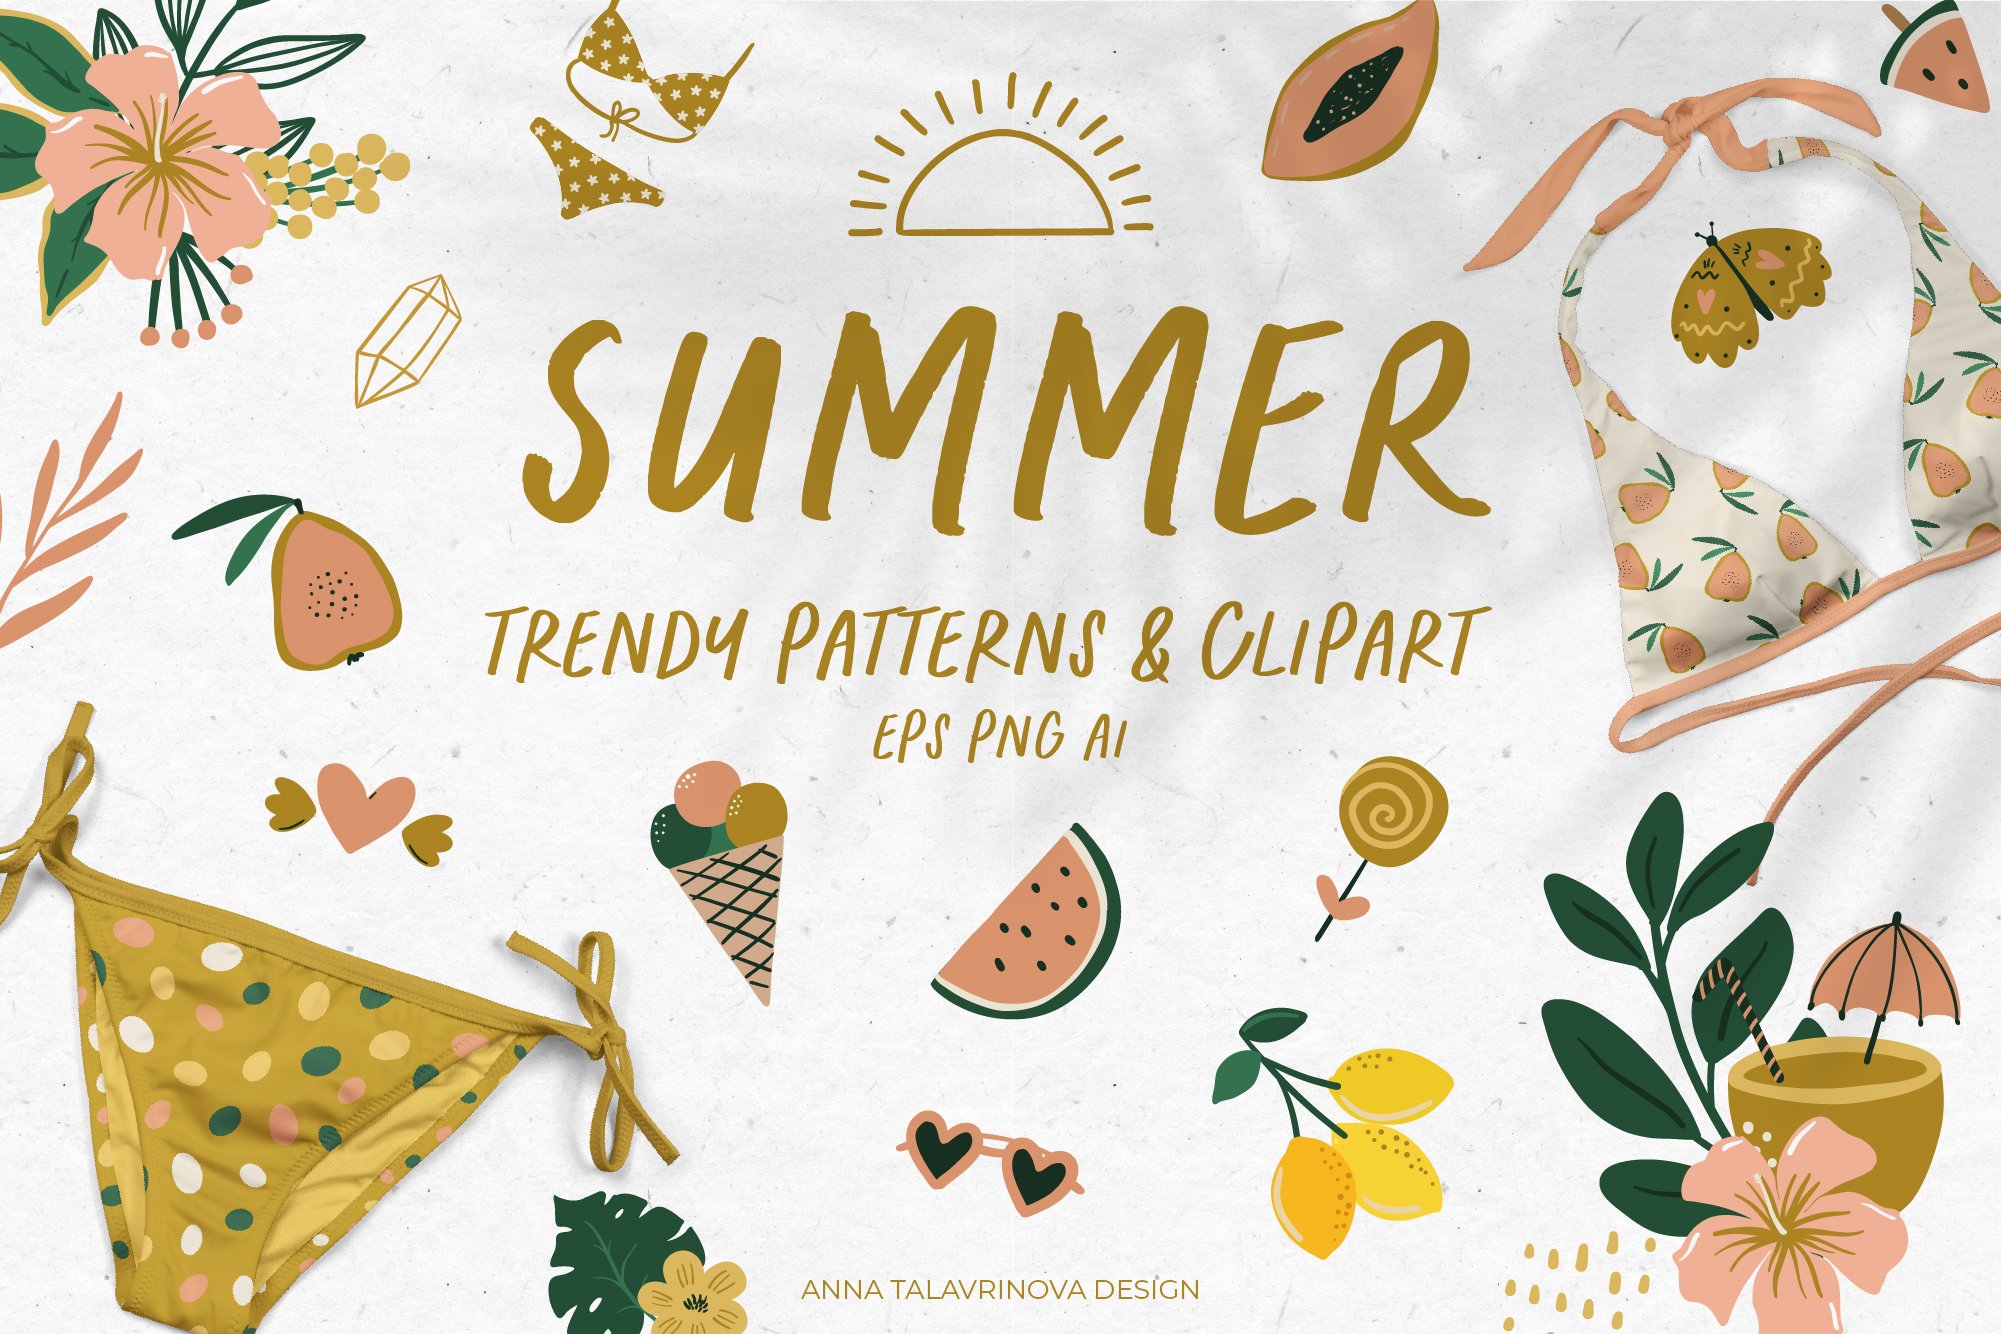 Summer pattern & clipart cover image.